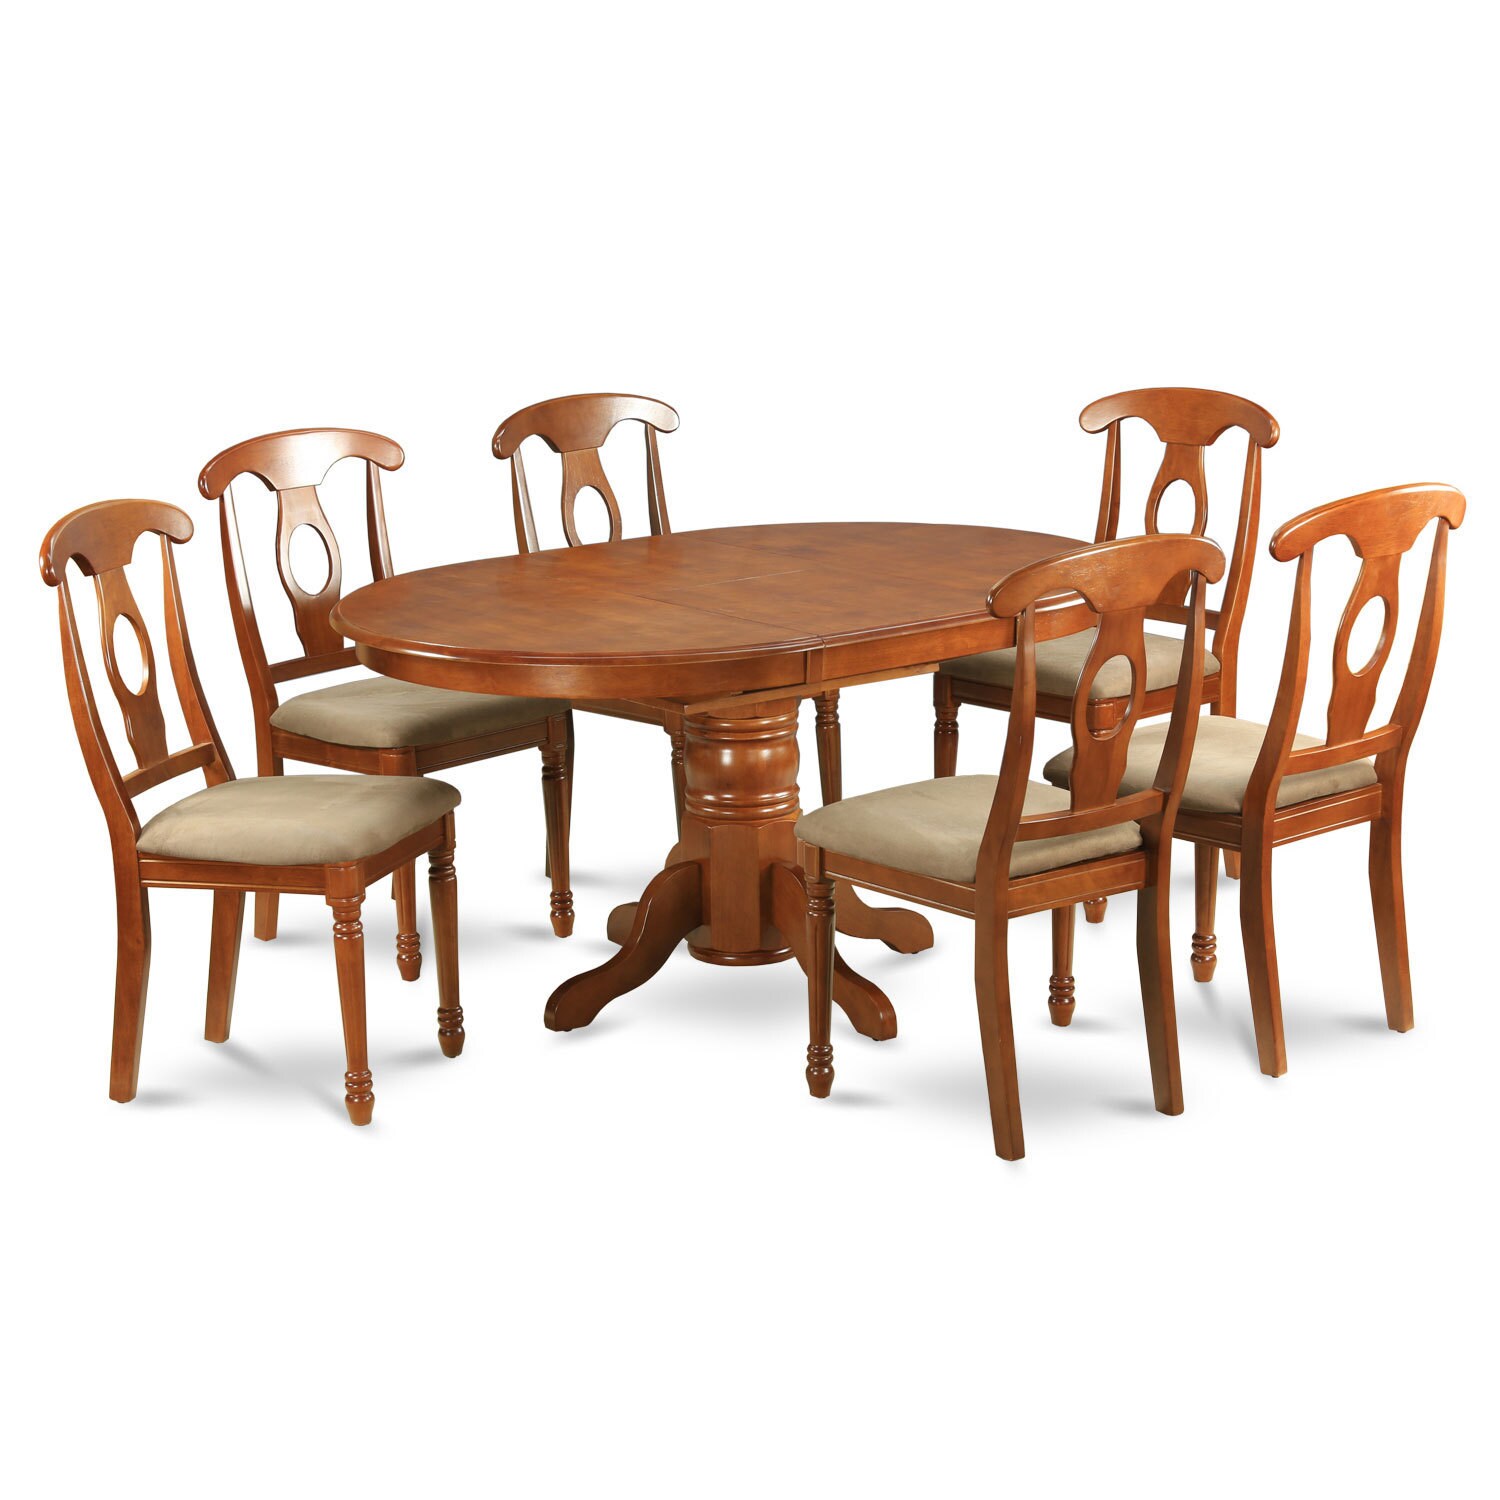 5 Piece Dining Table Having Leaf And 4 Kitchen Chairs For Sale Online EBay